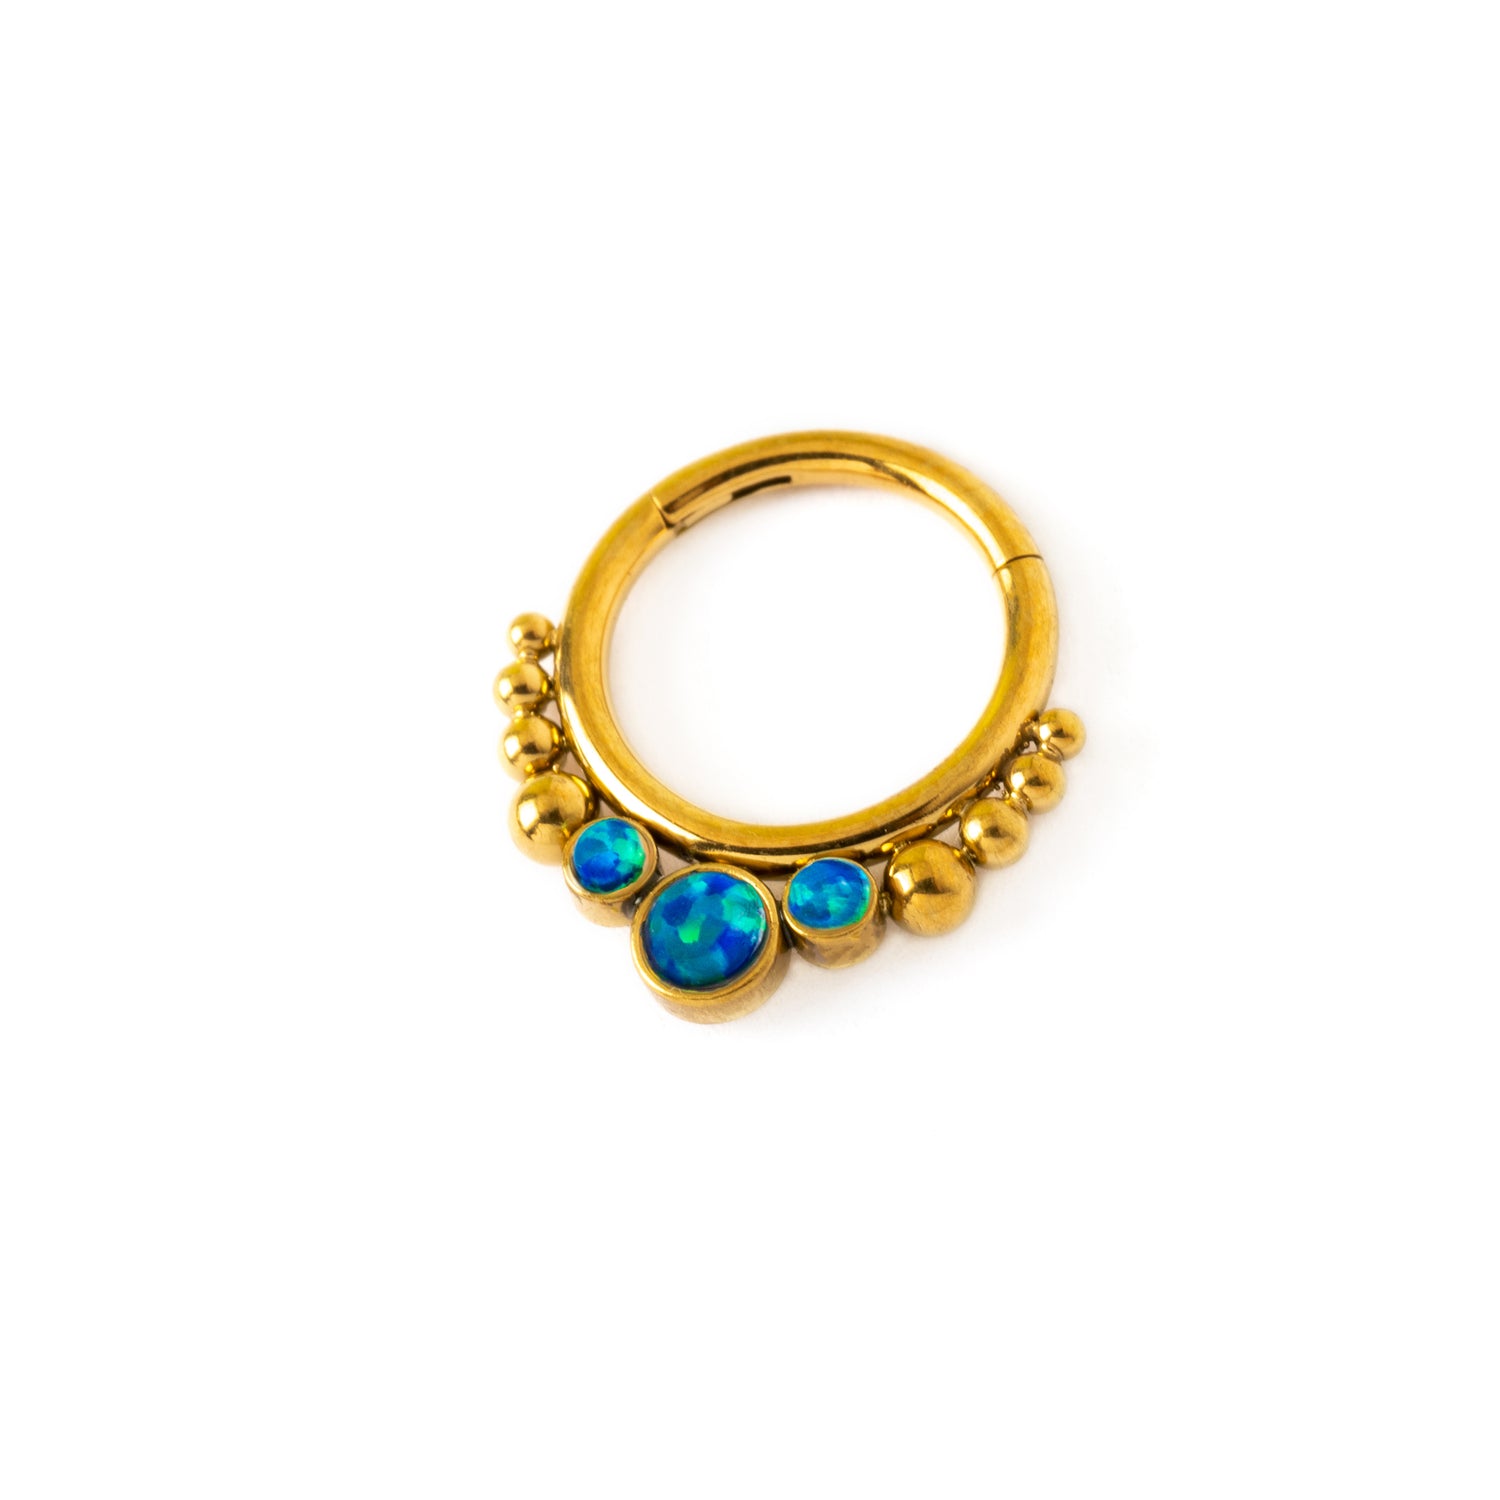 Golden Siti Clicker Ring with Blue Opal right side view